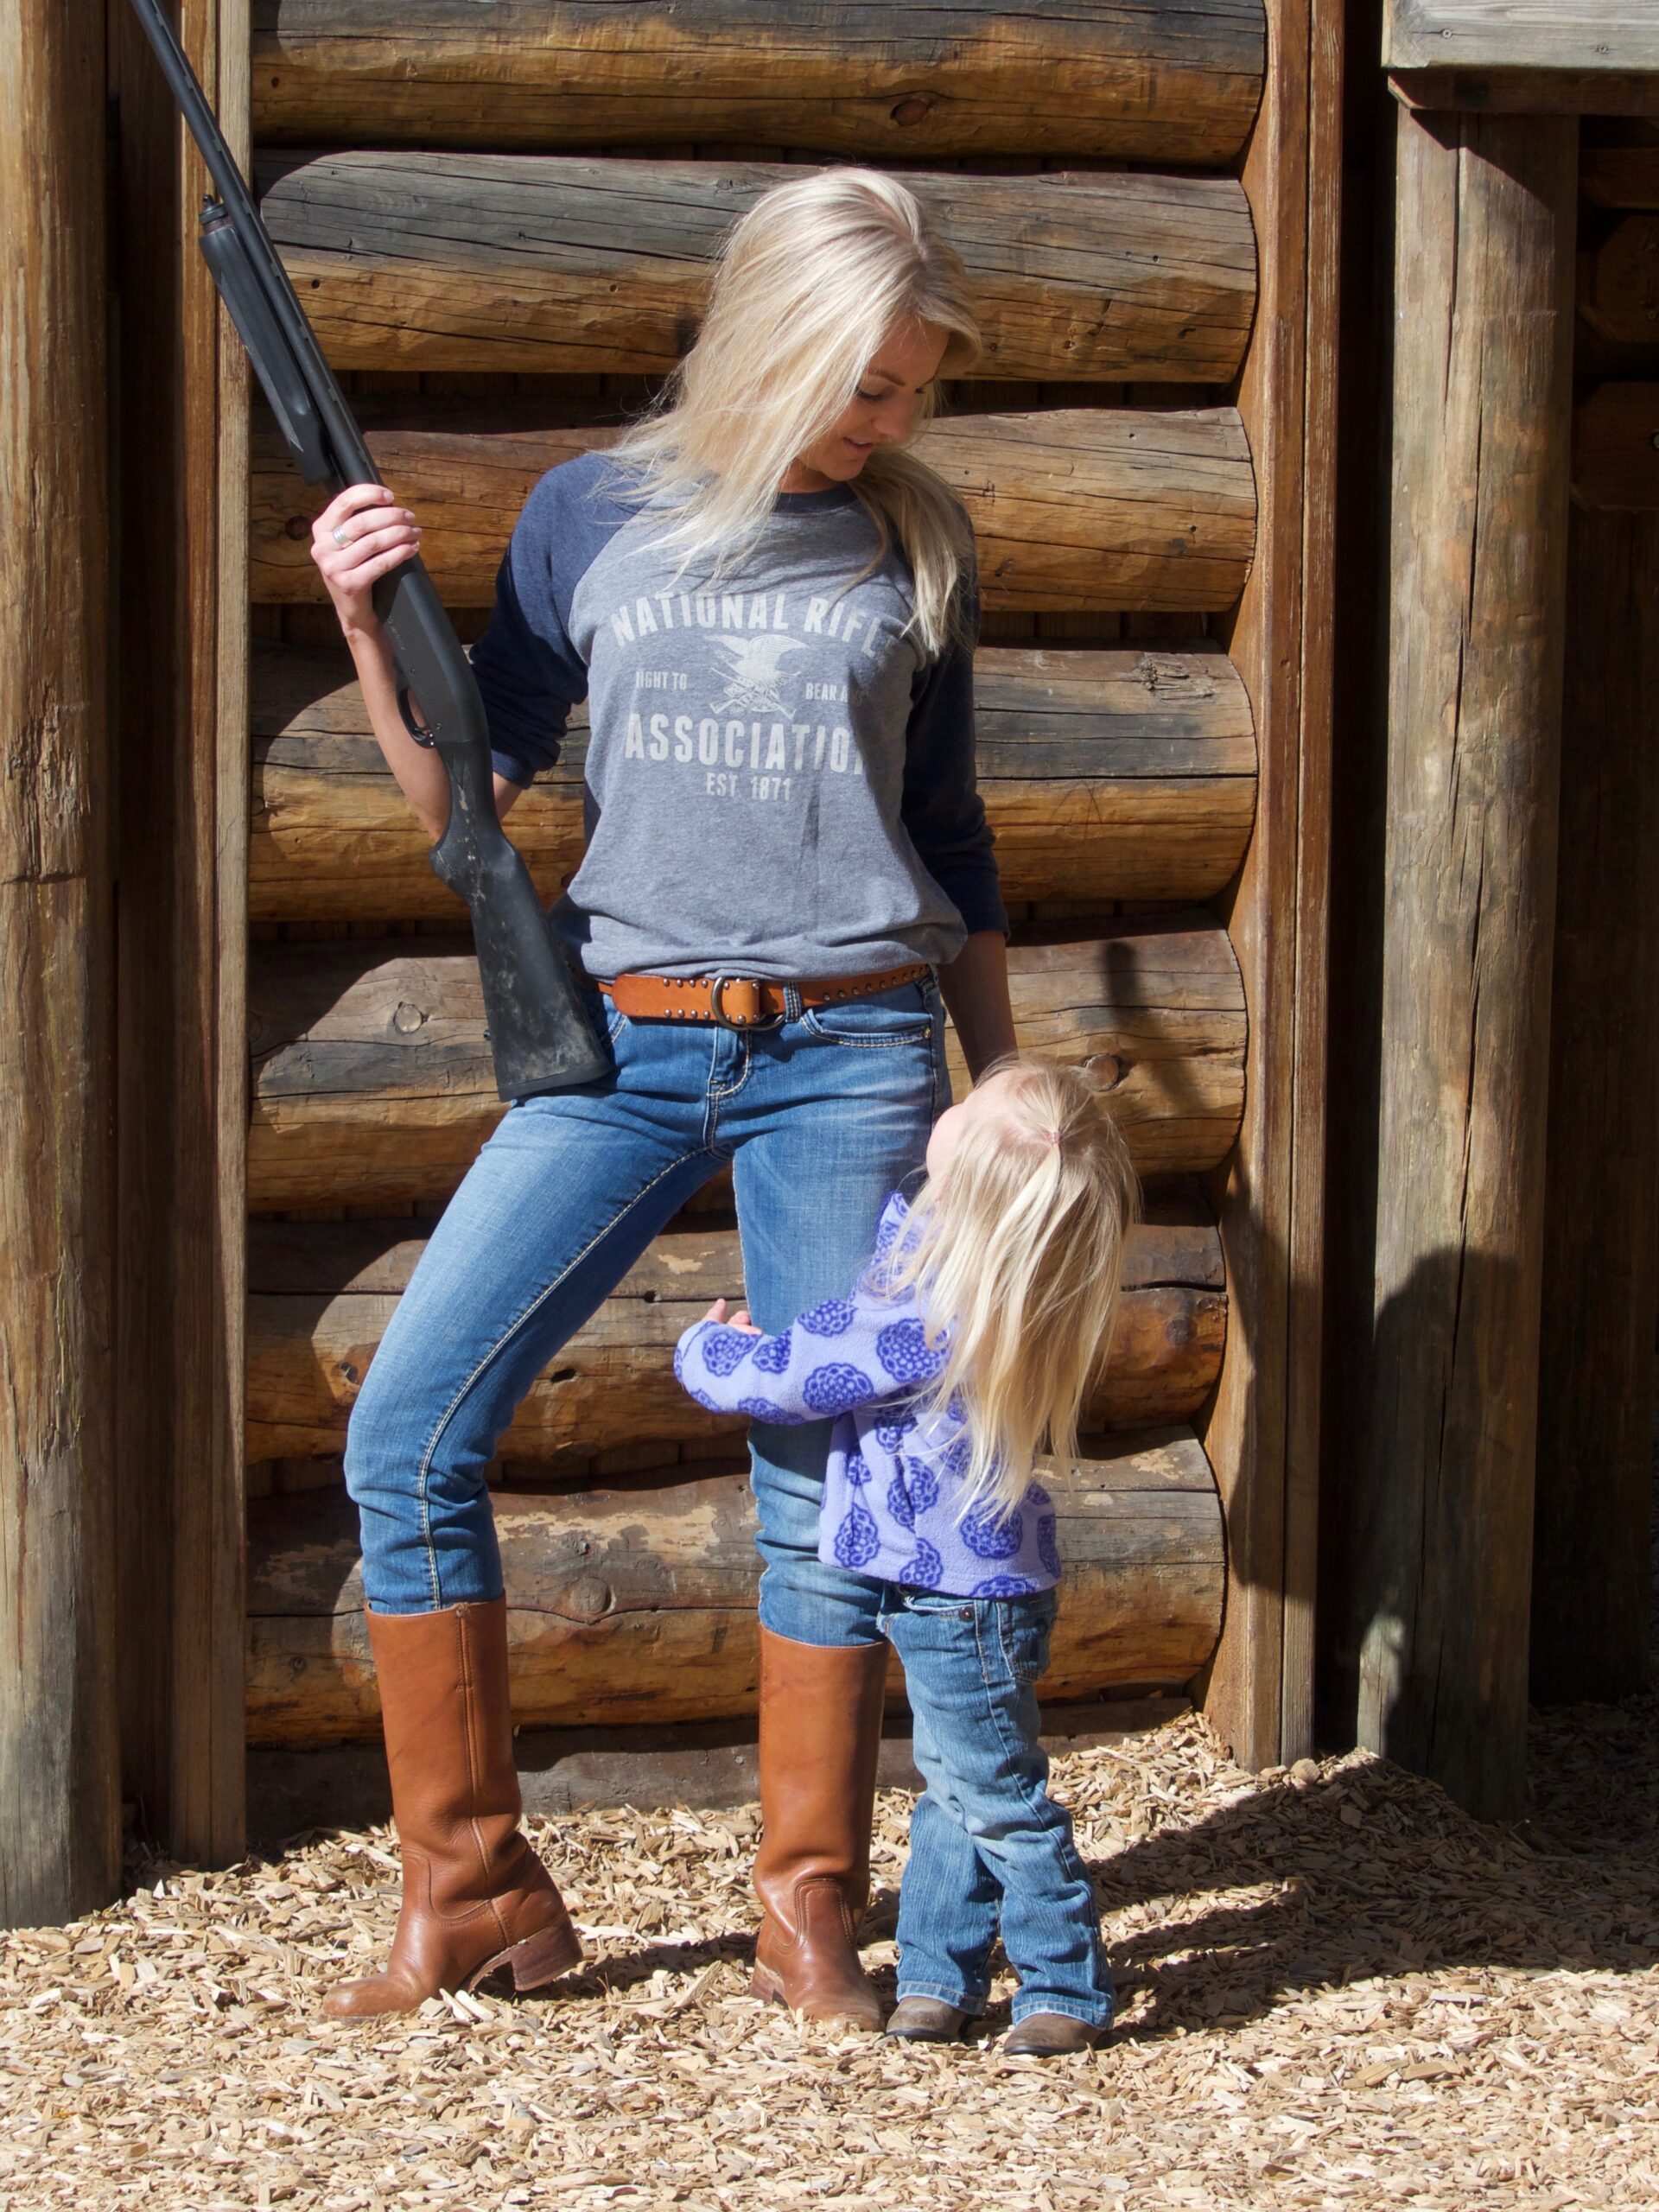 A girl standing with a small child holding a gun